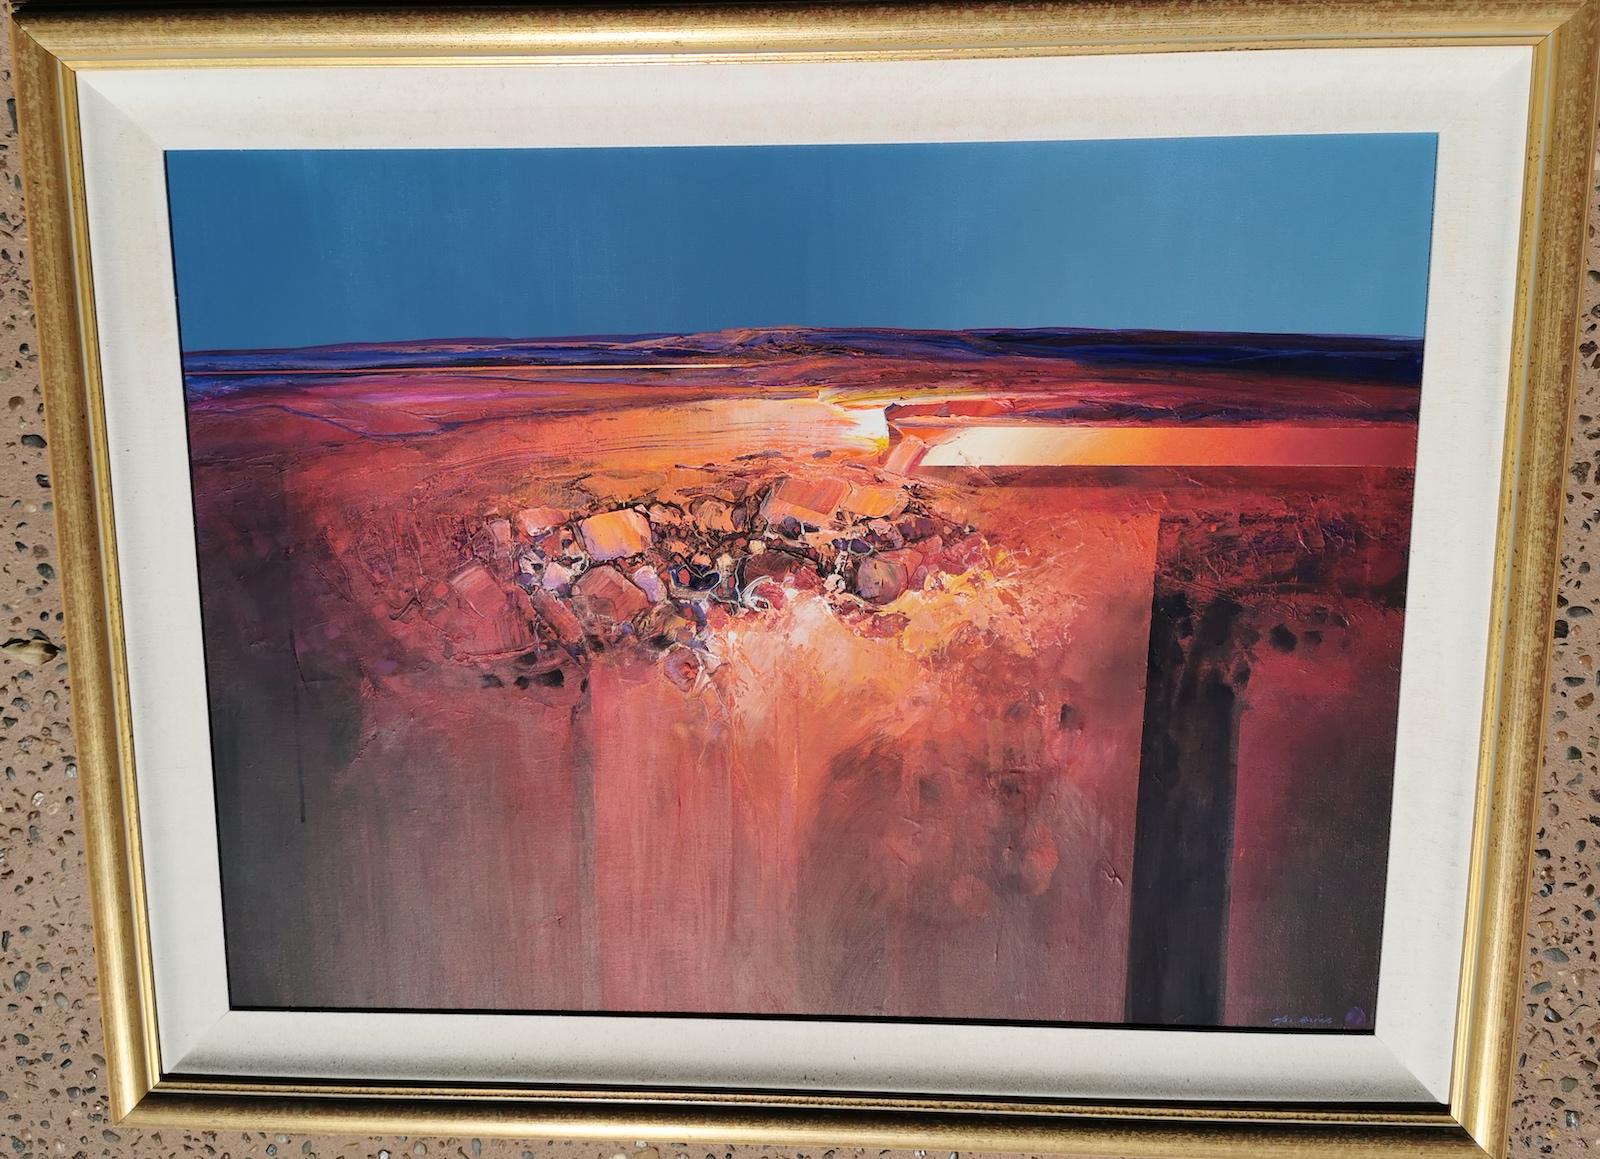 Mel Brigg (1950), desert light
acrylic on canvas,
signed lower right,
image measures: 100 x 75, frame 124 x 99cm
Our eclectic stock crosses cultures, continents, styles and famous names.
Expansive in their vision, Mel Briggs paintings are seemingly